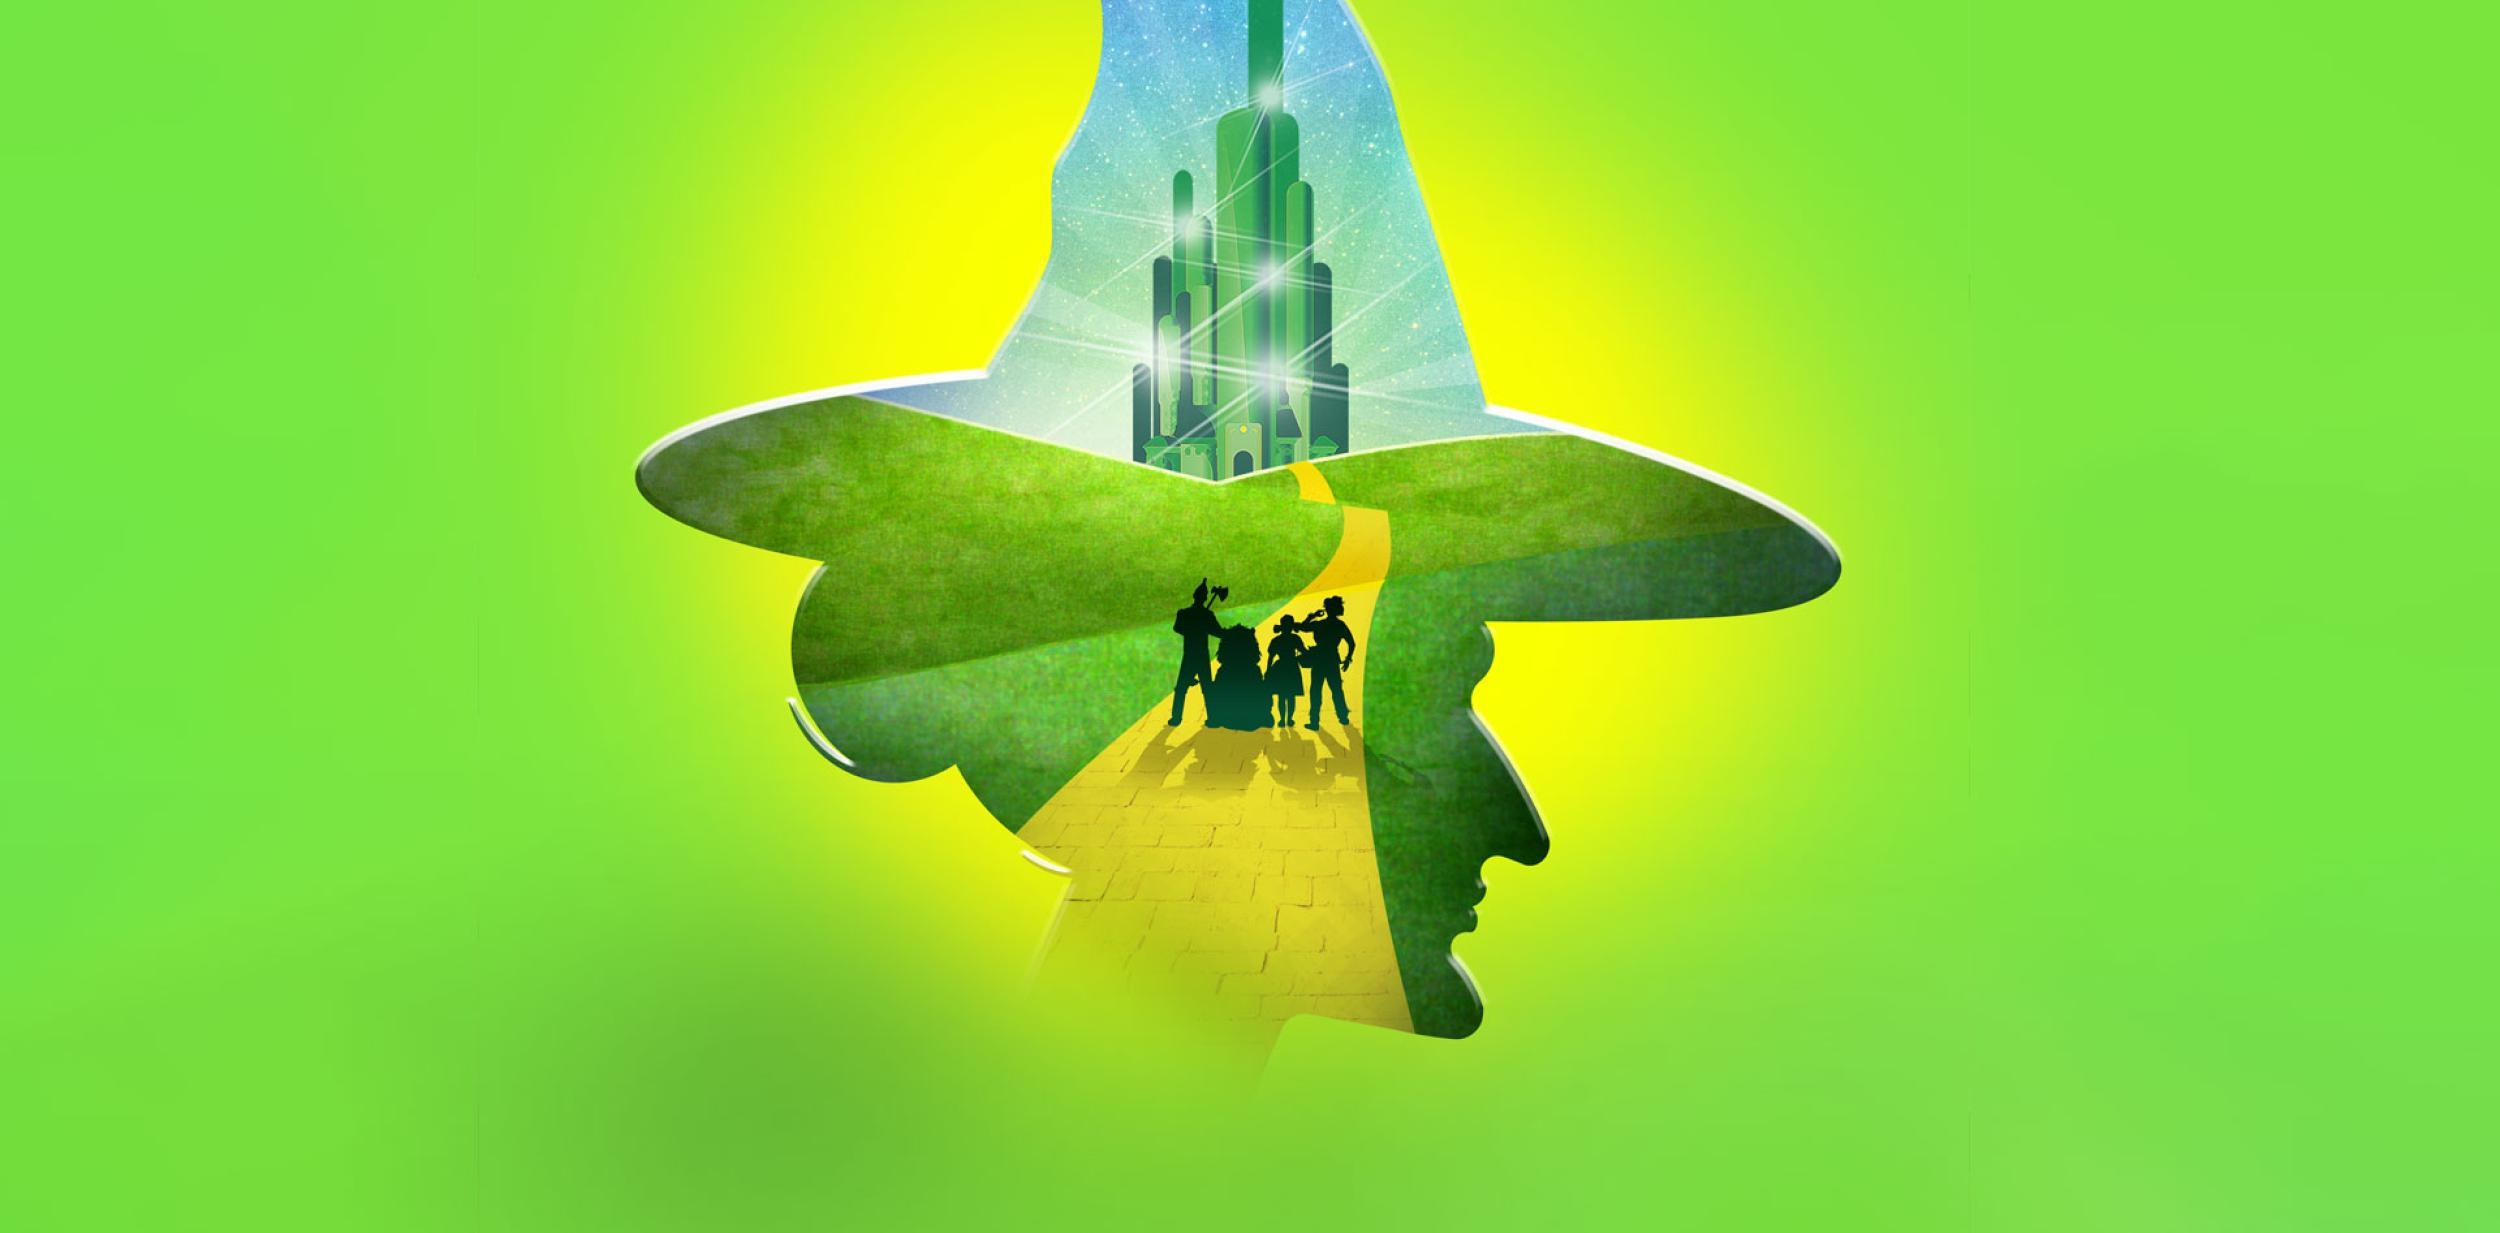 Wizard of Oz illustration. Witch silhouette with yellow brick road and emerald city.